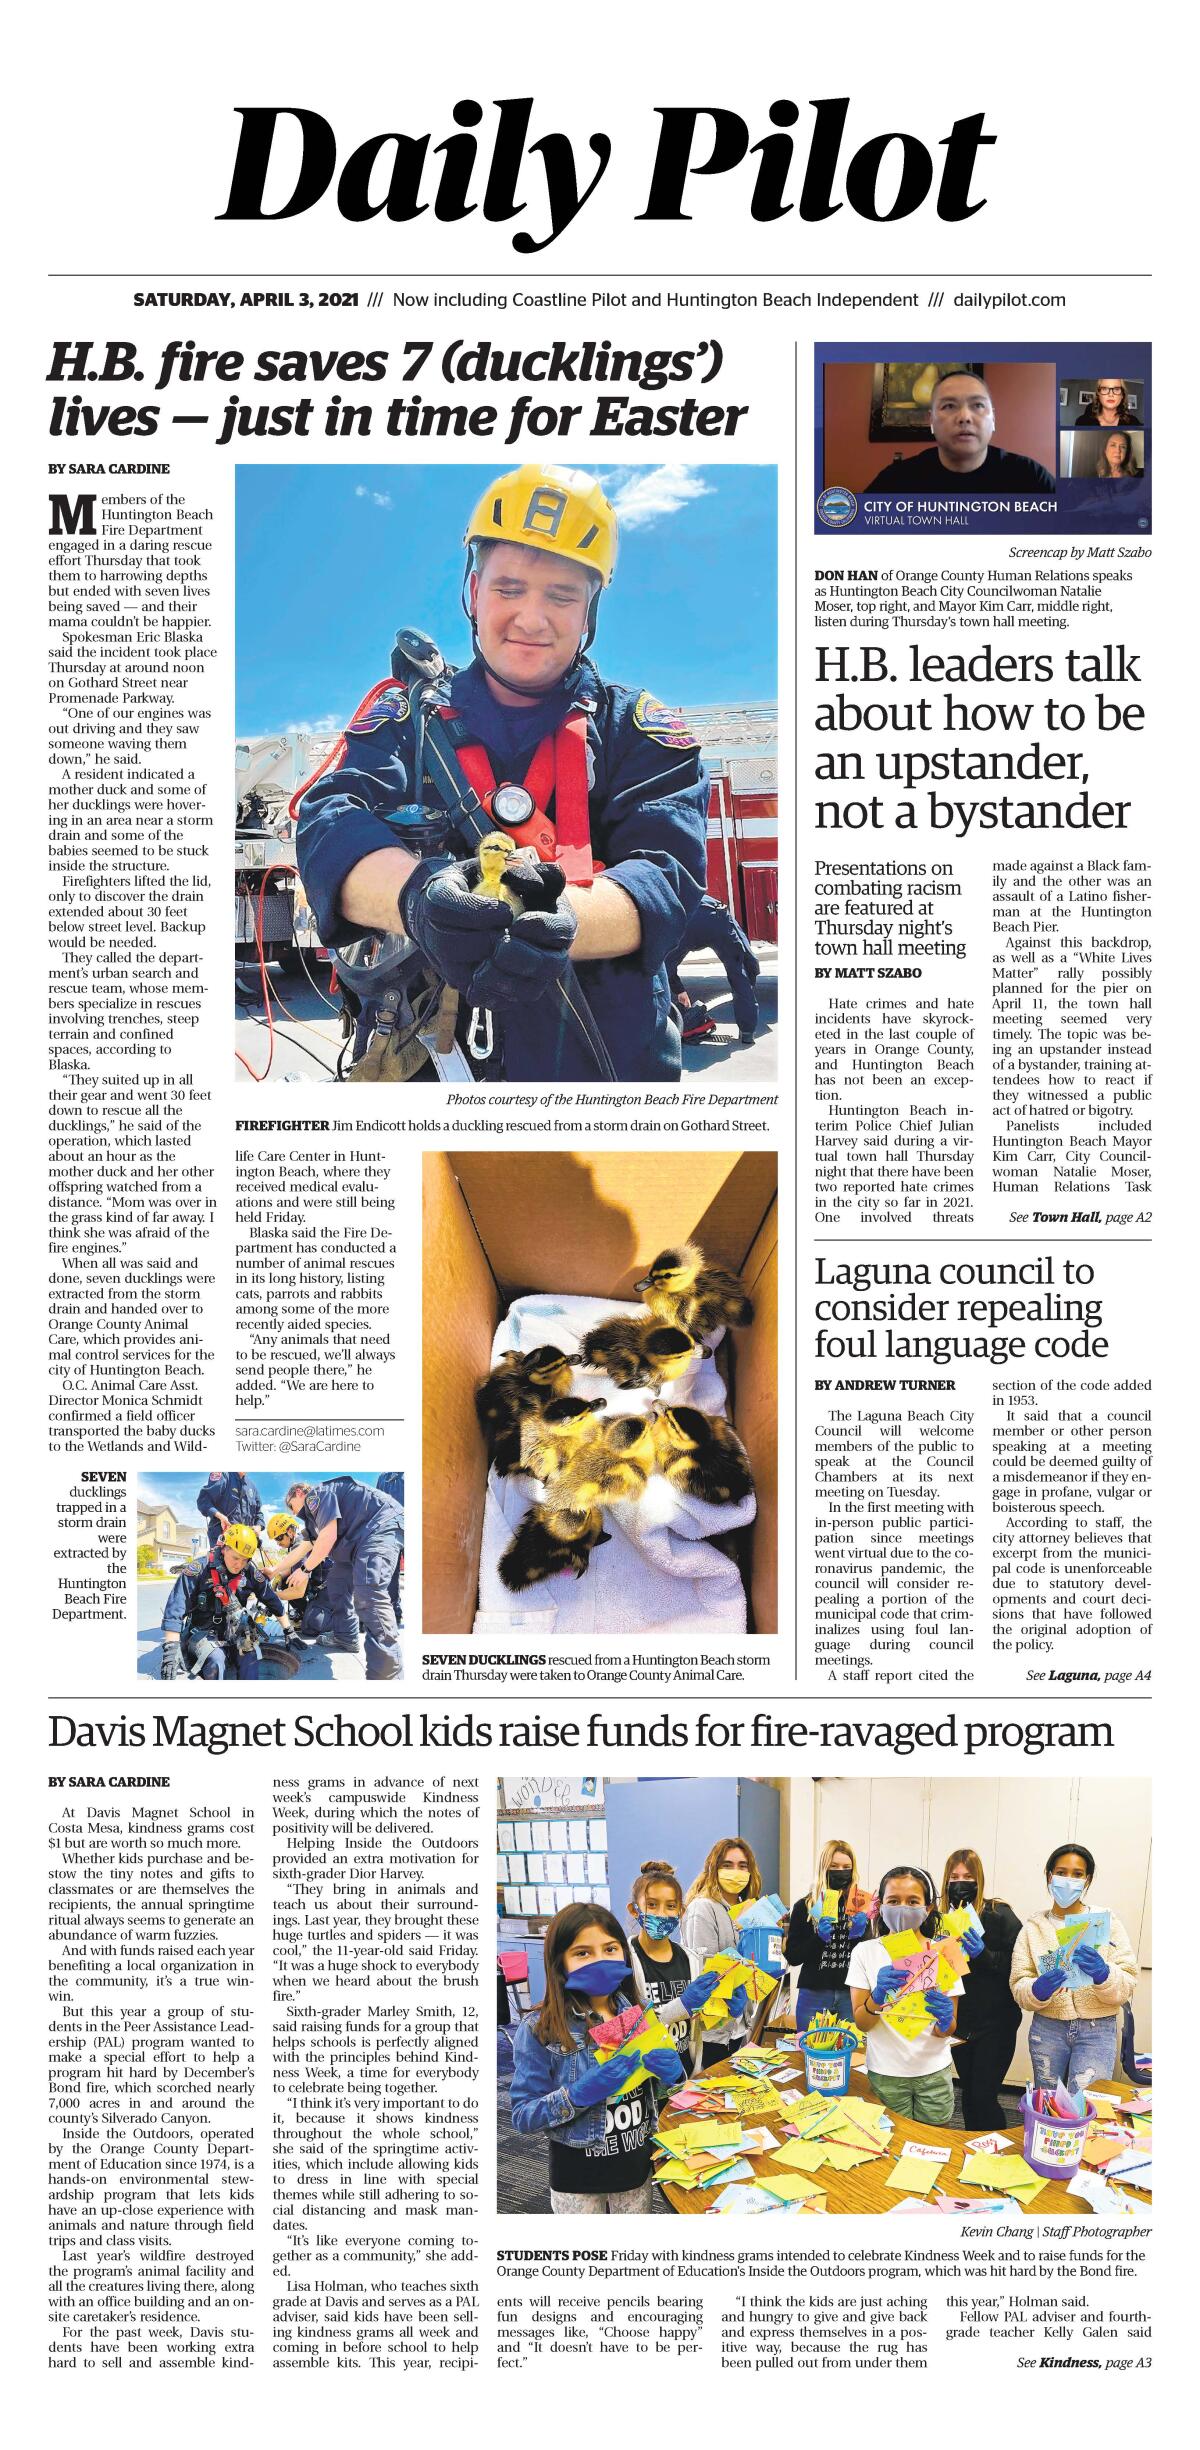 Front page of Daily Pilot e-newspaper for Saturday, April 4, 2021.